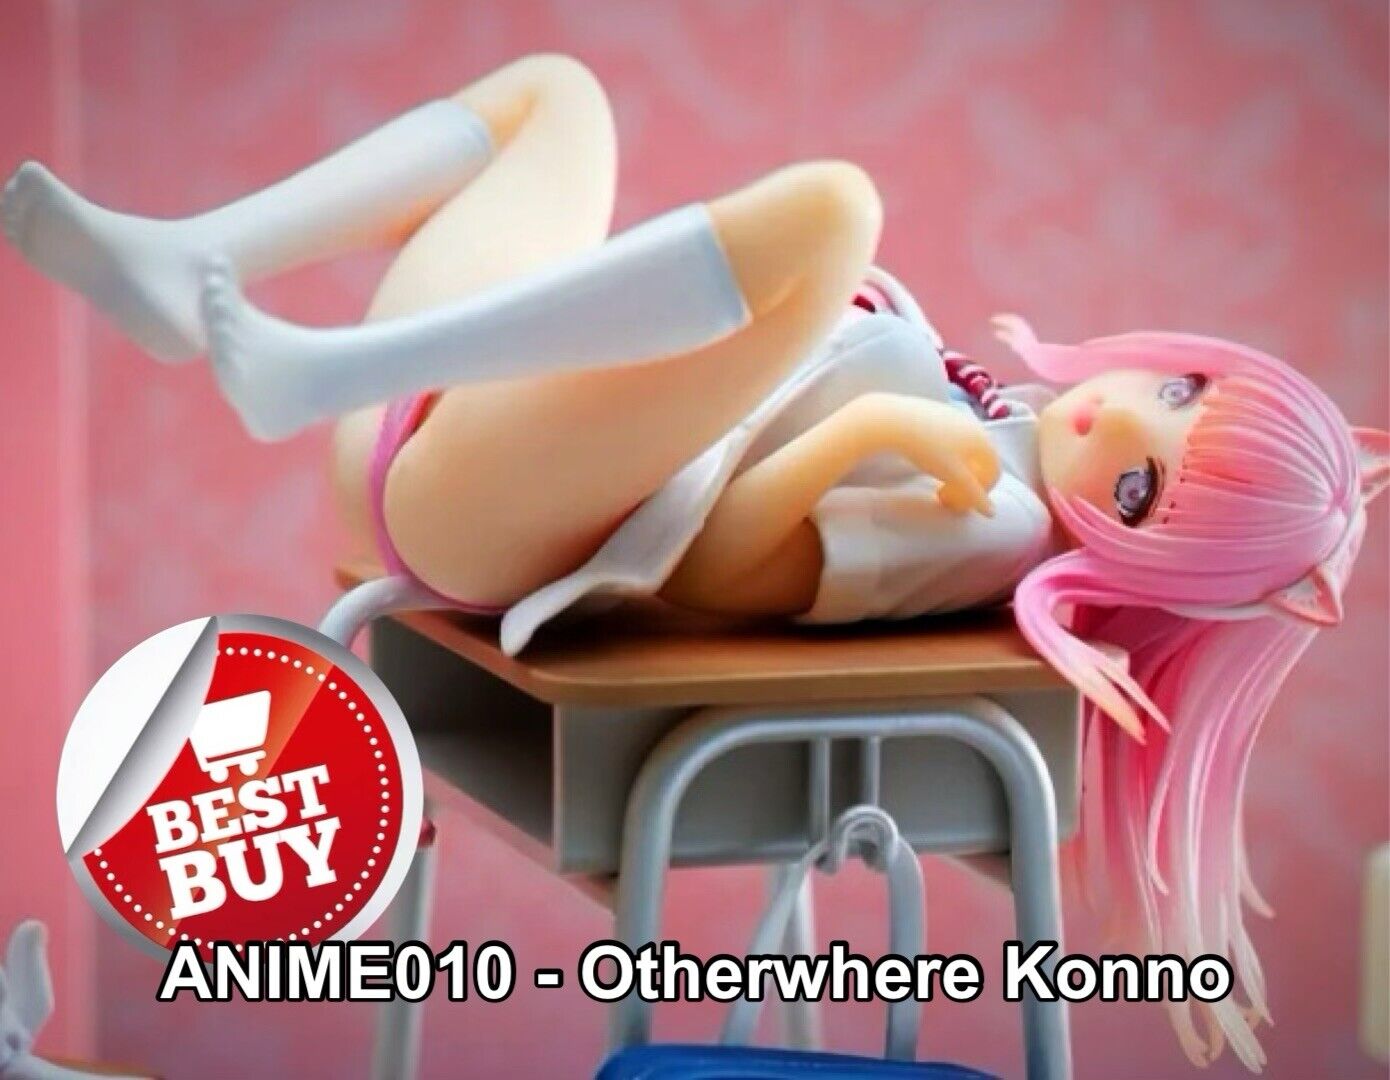 Hot Sexy Anime PSL Otherwhere Konno 1/7 Completed Figure PVC ANIME010